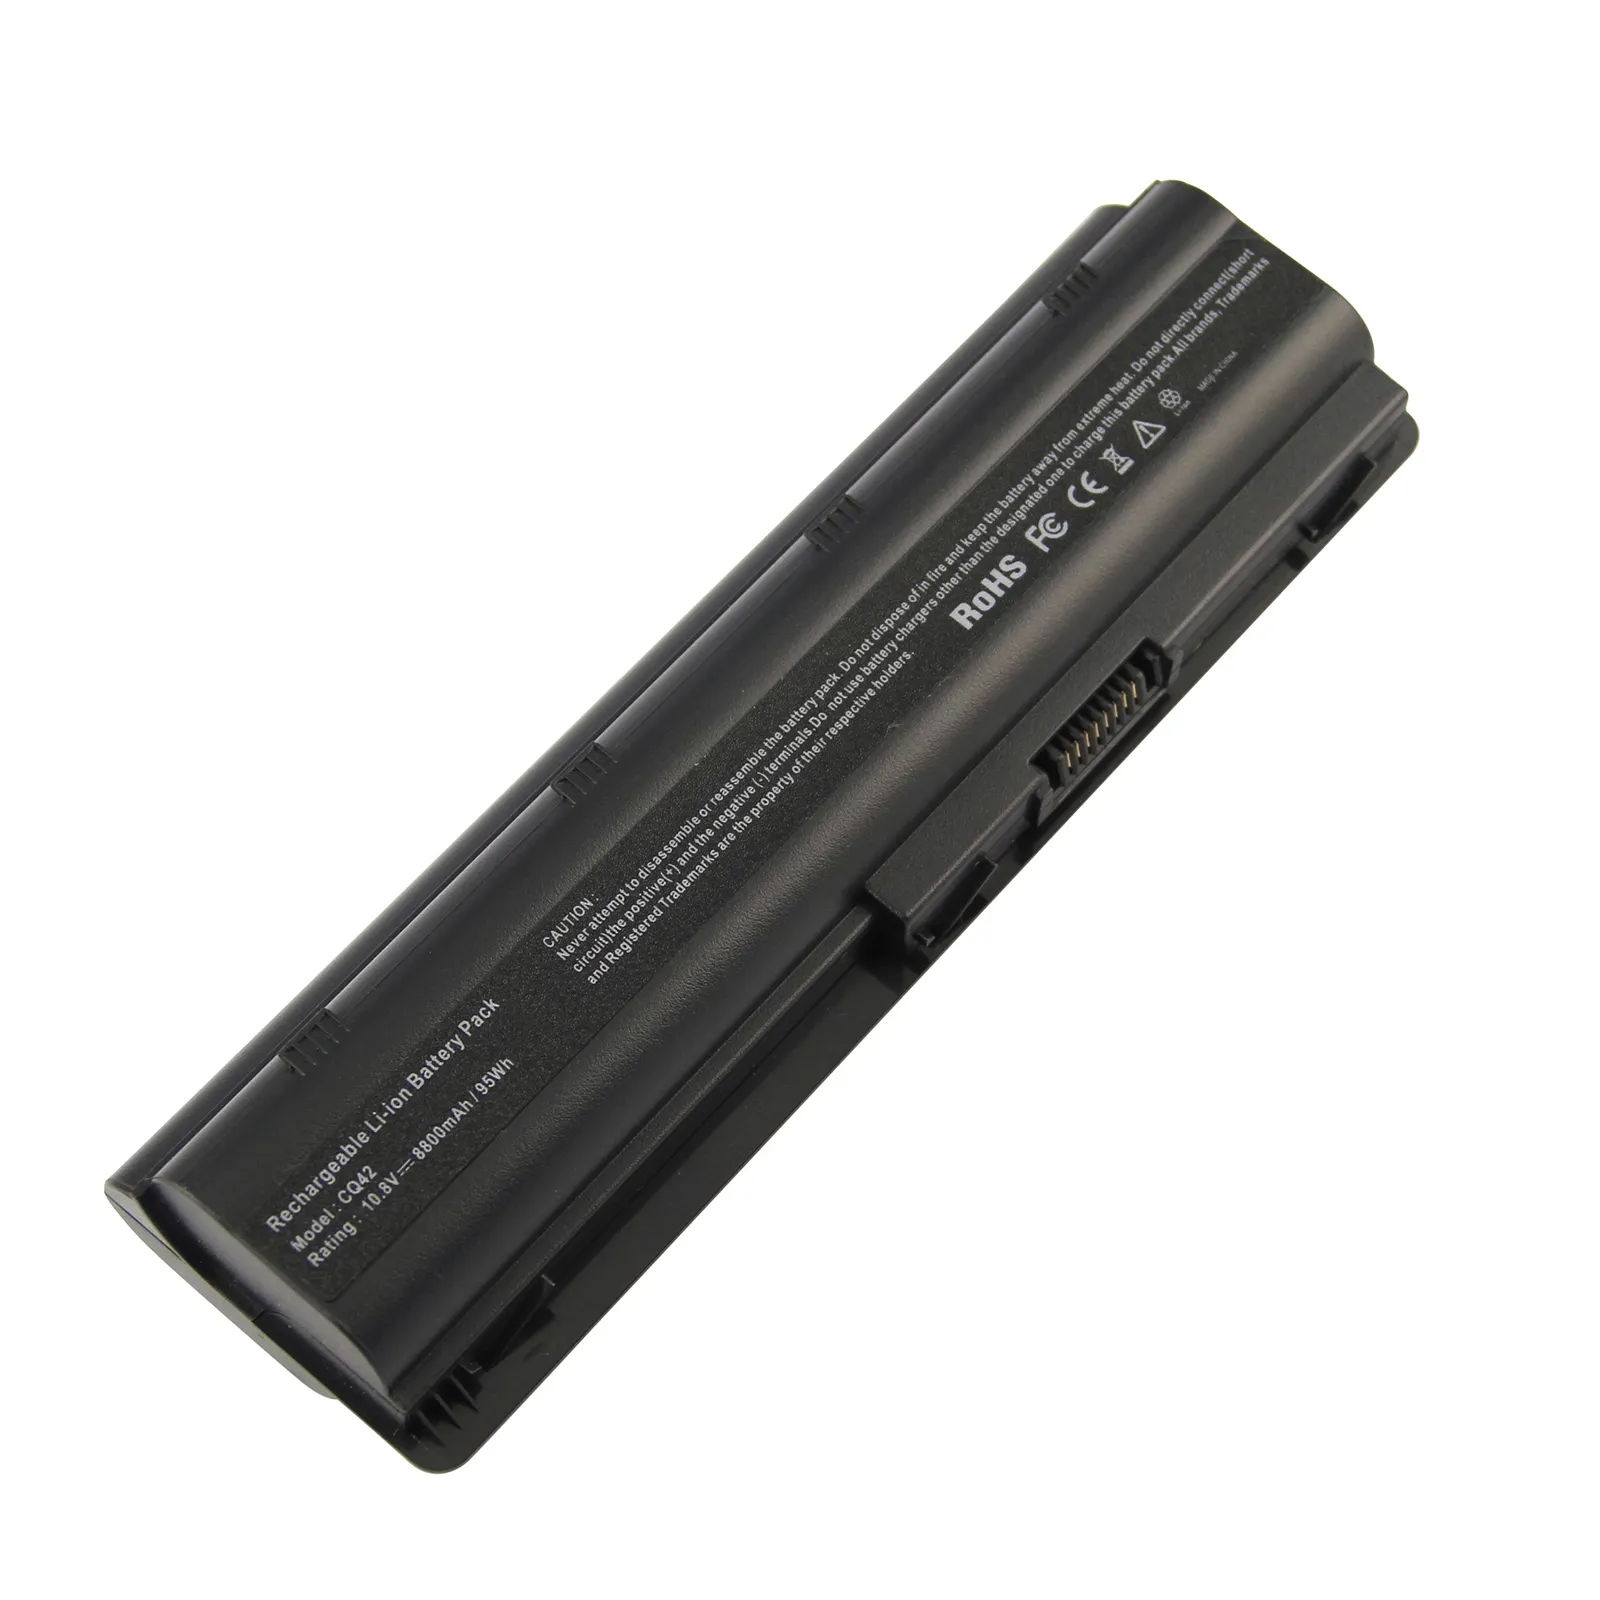 10.8V 8800mAh Replacement Battery Spare 593553-001 HP Compaq Presario CQ32 CQ42 CQ43 wholesale laptop battery for HP